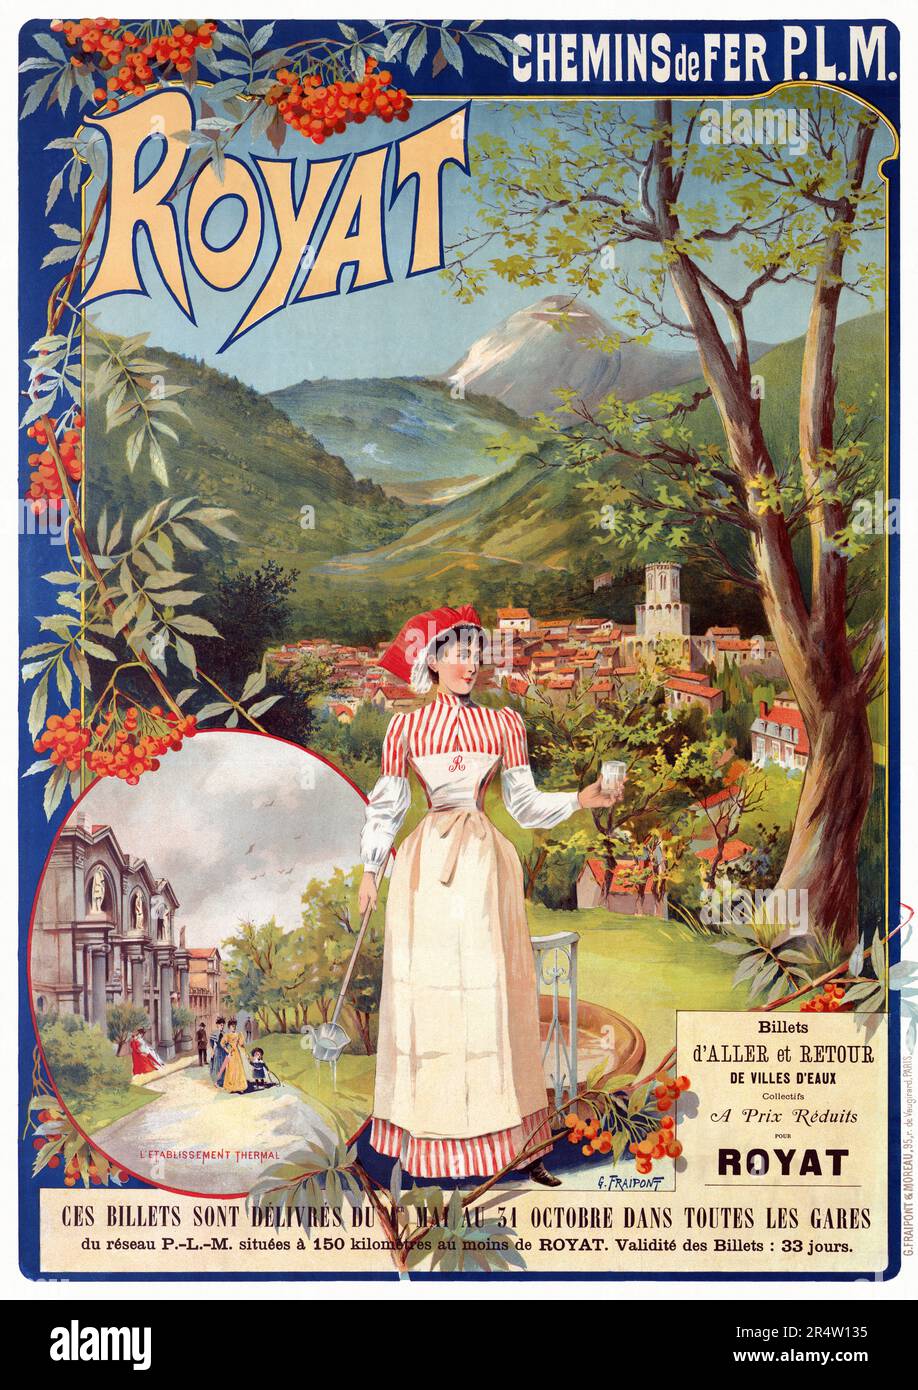 Chemins de Fer P.L.M.  Royat by Gustave Fraipont (1849-1923). Poster published in 1896 in France. Stock Photo